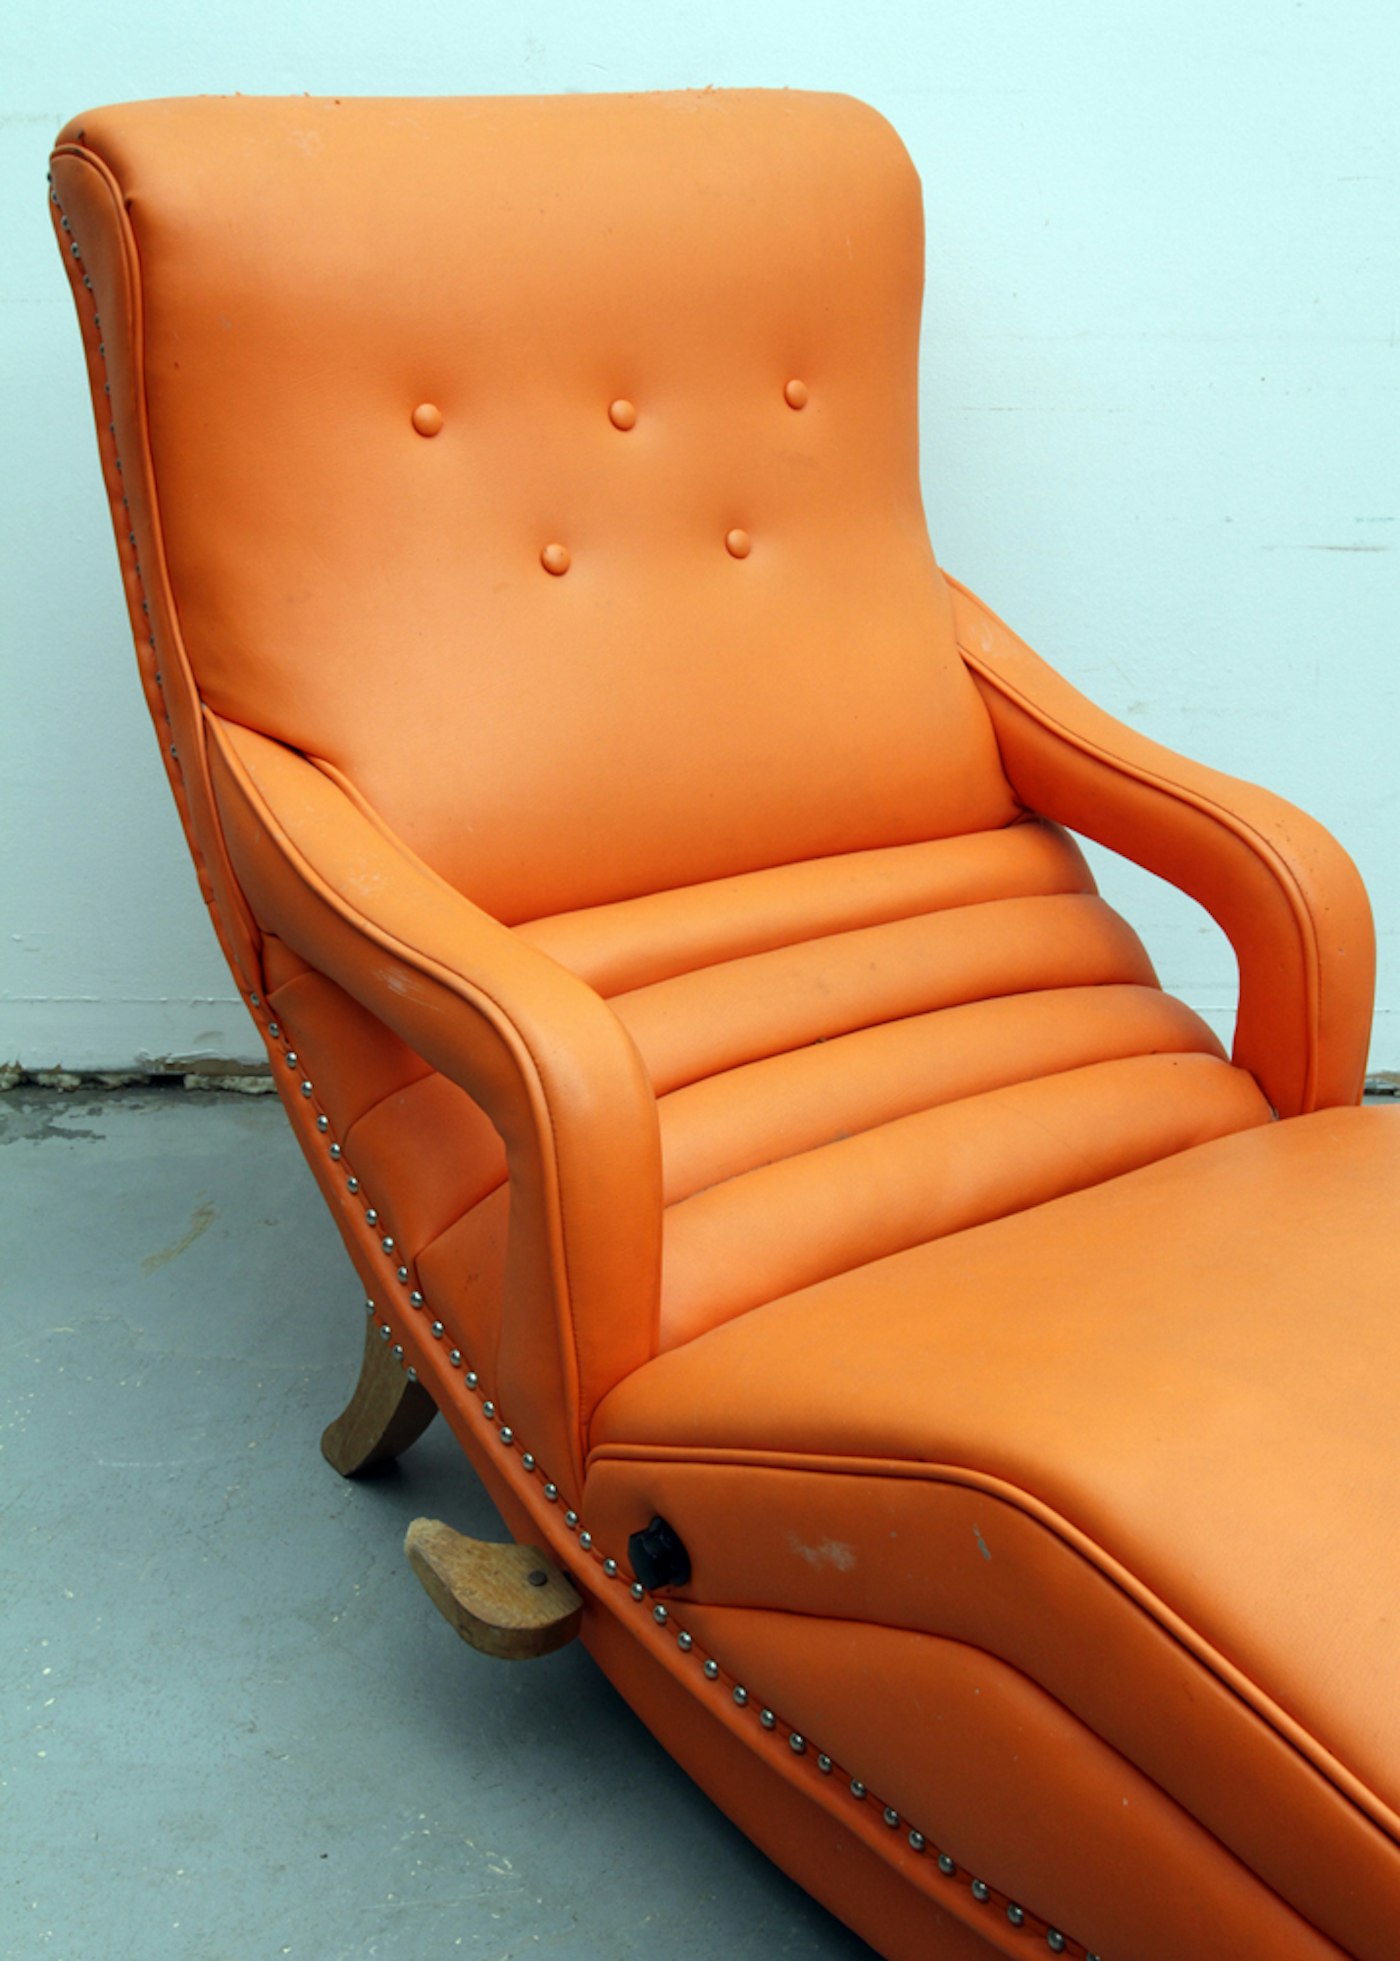 Mid Century Modern Massage Recliner by the Contour Chair Co. | EBTH